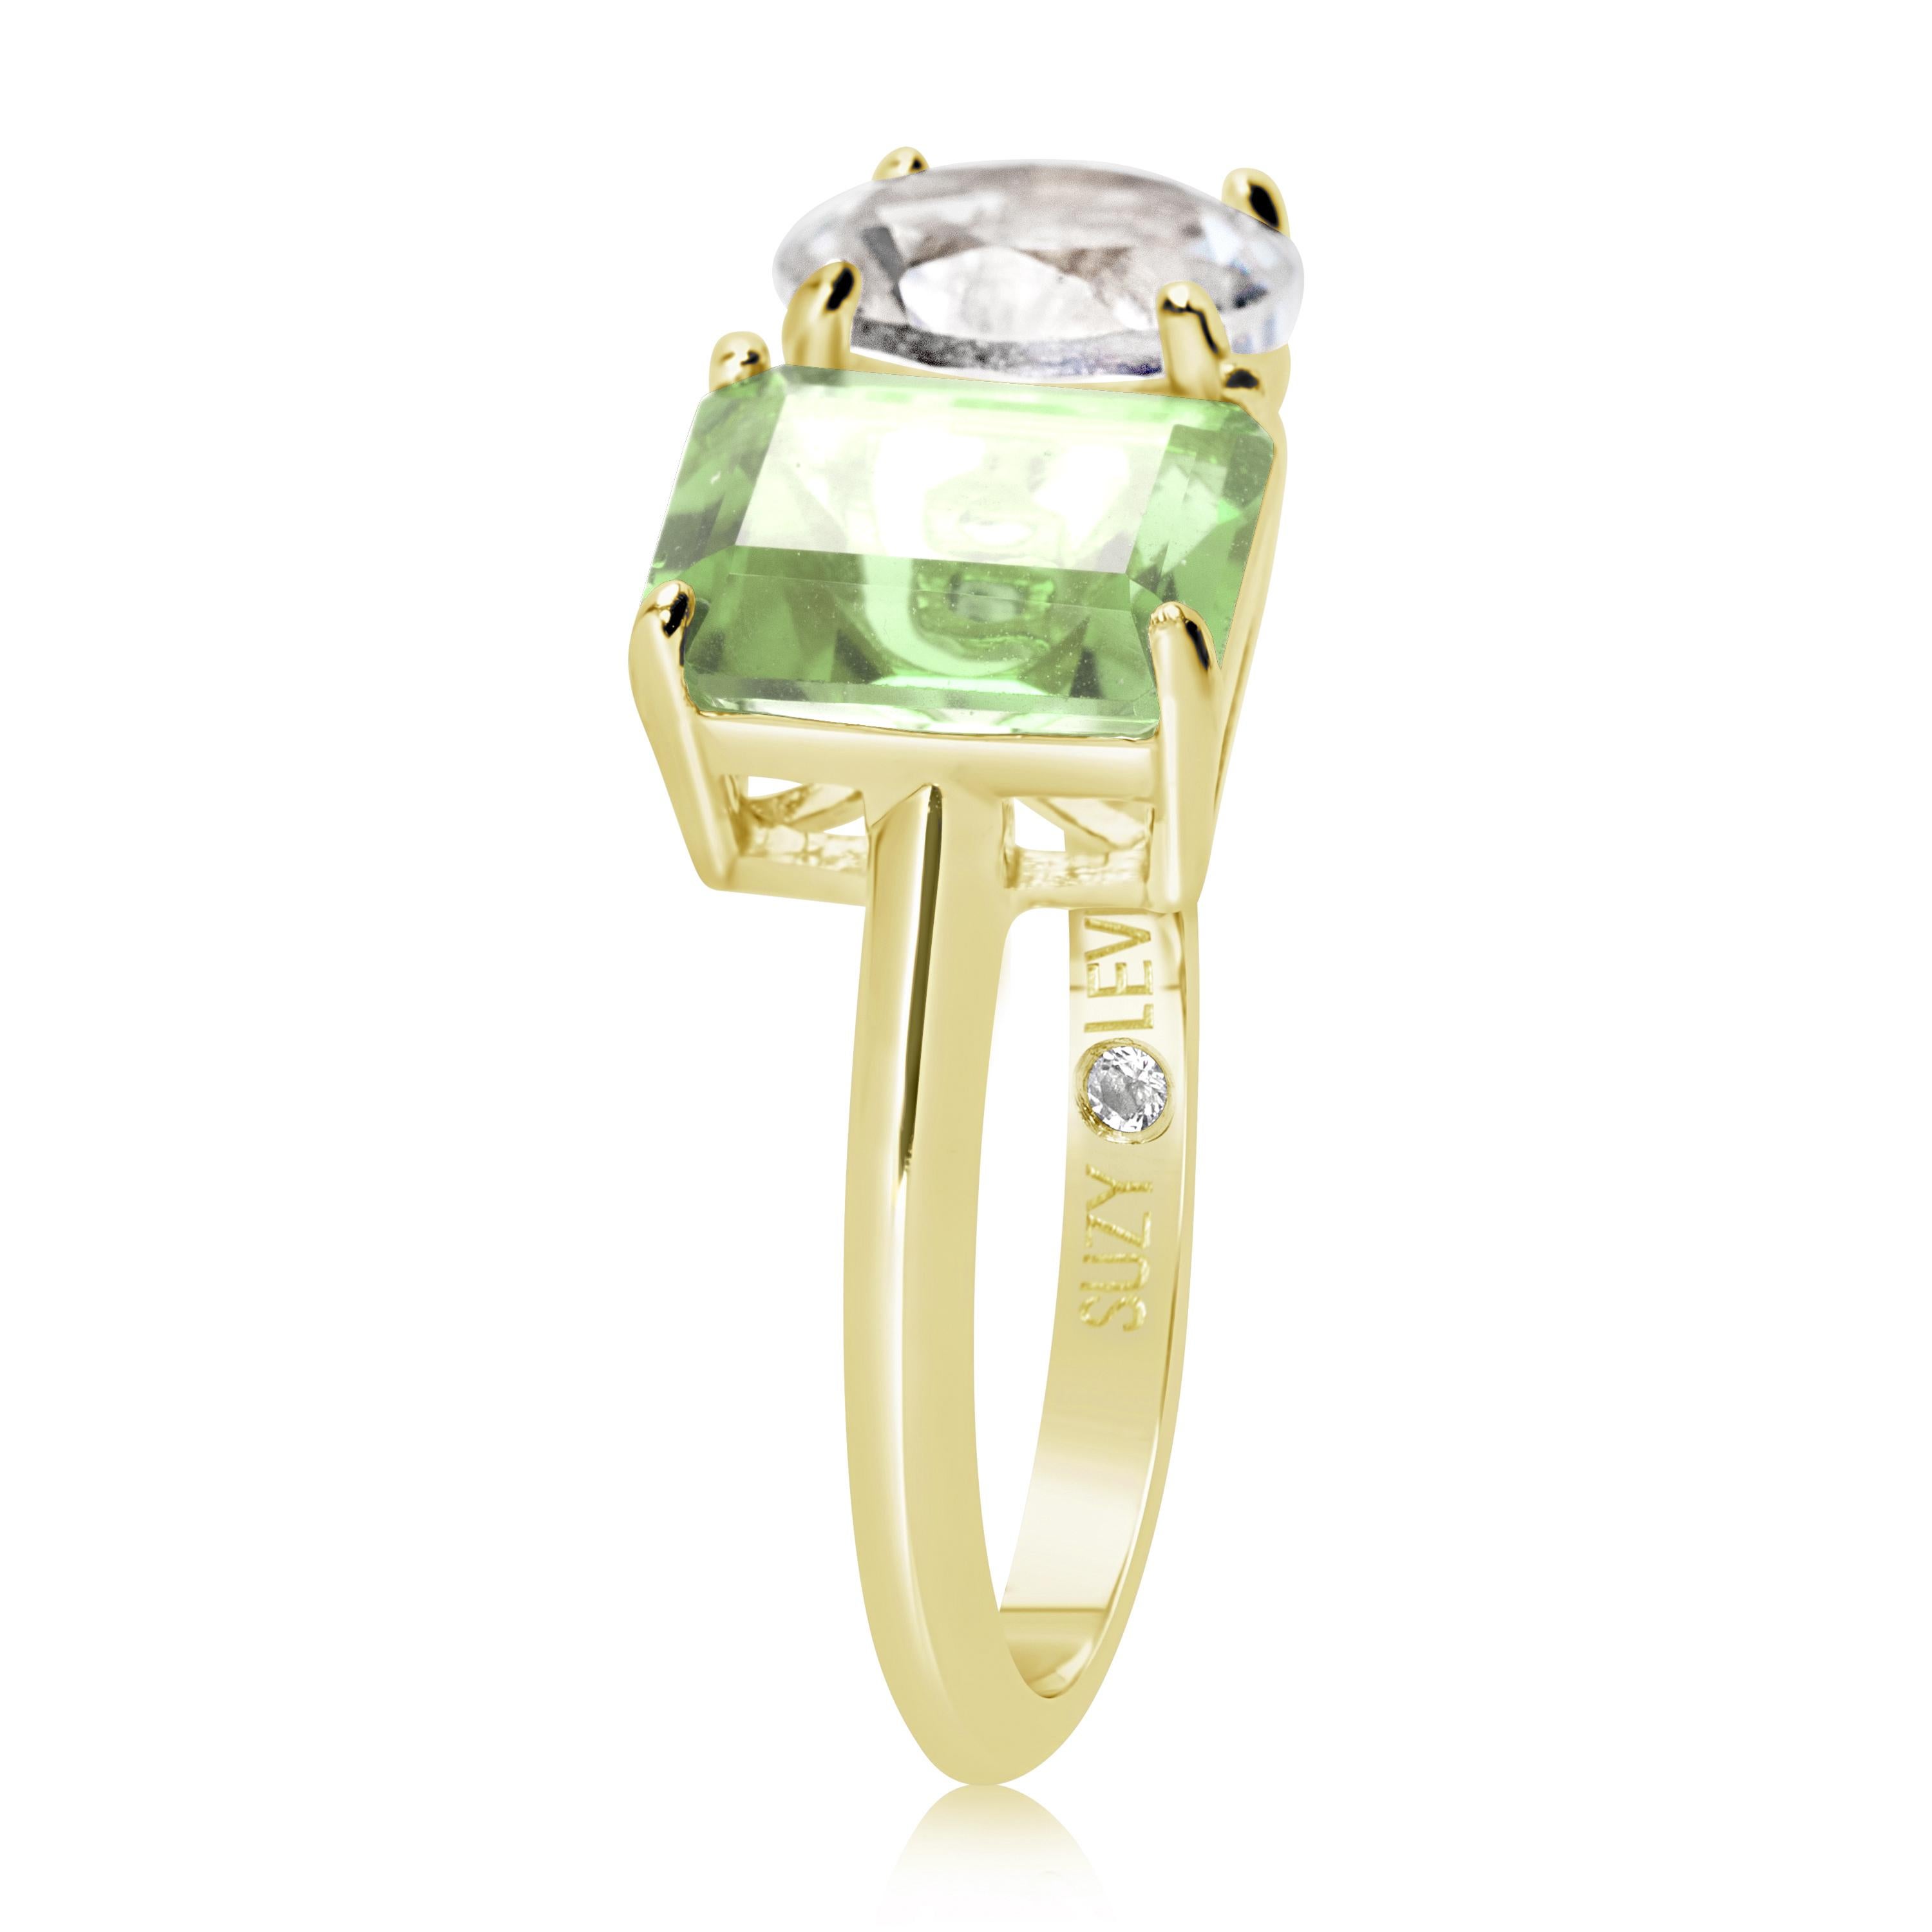 Shimmering in hues of white and green, this Suzy Levian ring is as on trend as can be, and features a round cut white topaz and an emerald cut green amethyst as a perfectly matched pair. This ring symbolizes a perfect pairing of unique shapes. This